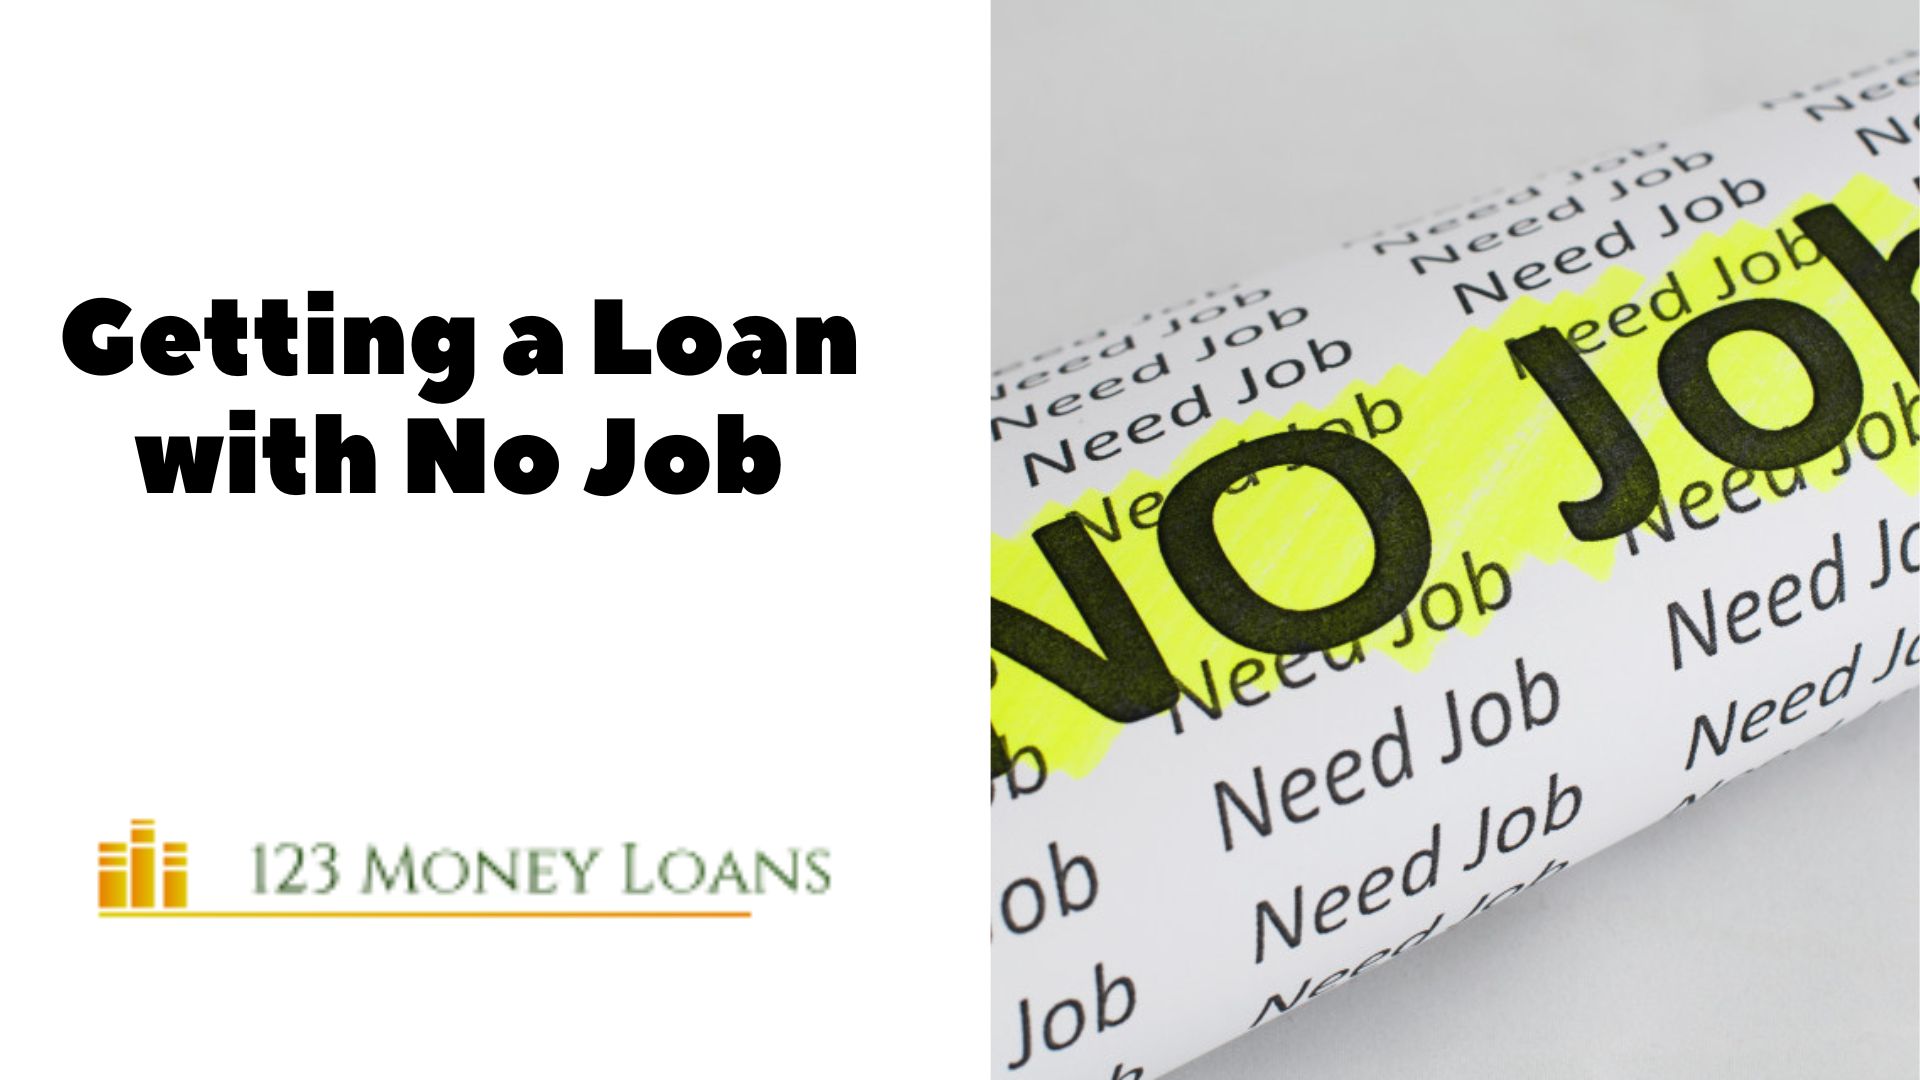 Getting a Loan with No Job